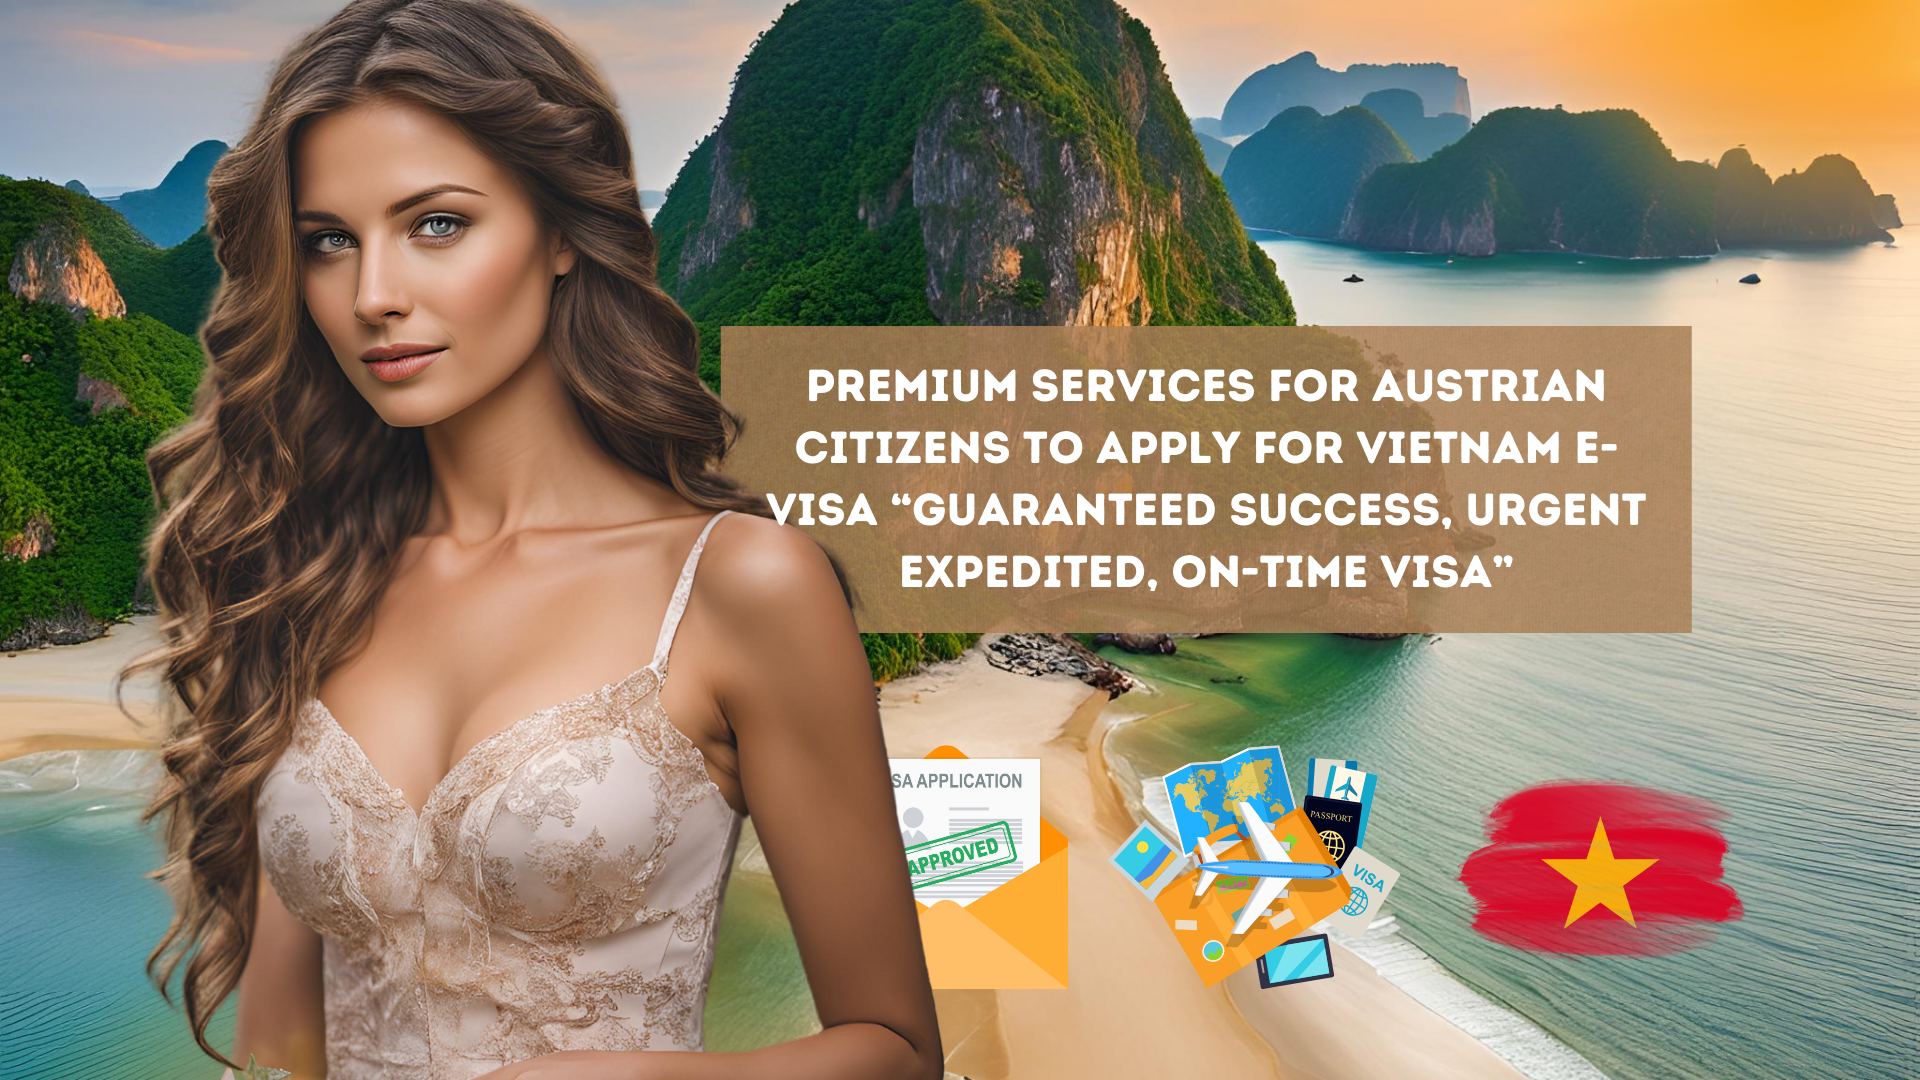 Premium Services for Austrian Citizens to apply for Vietnam e-visa “Guaranteed success, urgent expedited, on-time visa”